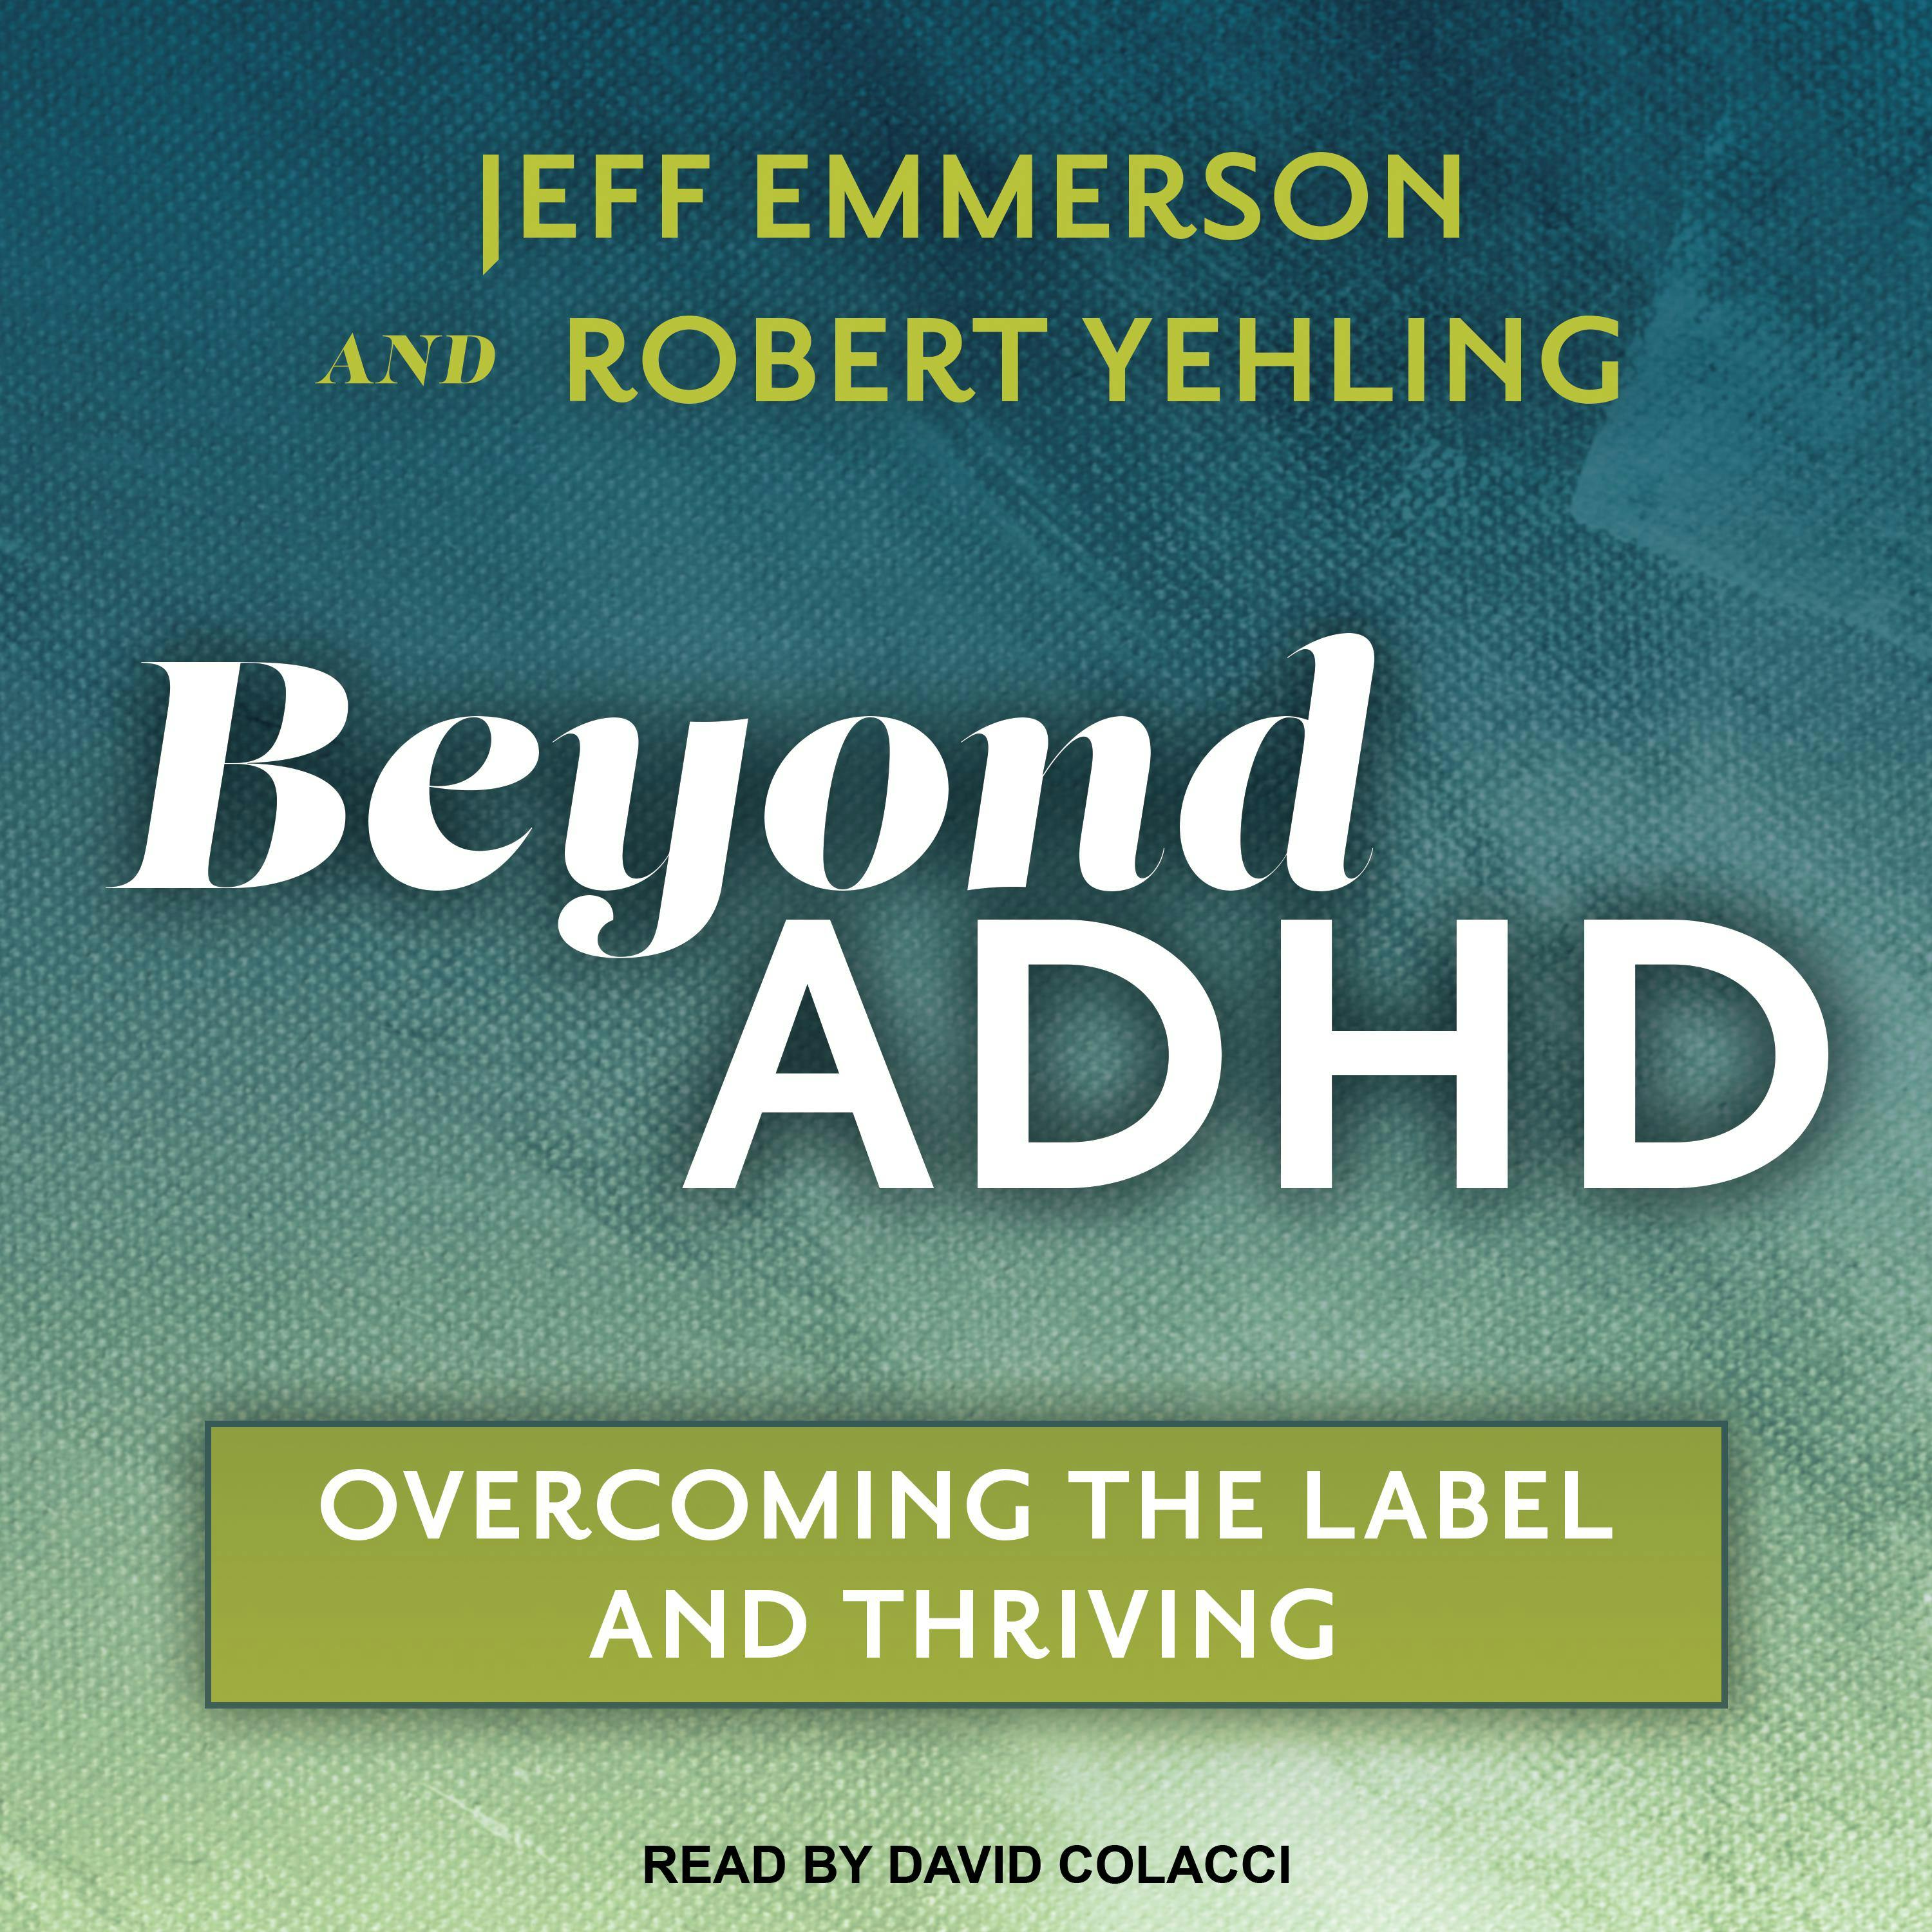 Beyond ADHD: Overcoming the Label and Thriving - Jeff Emmerson, Robert Yehling